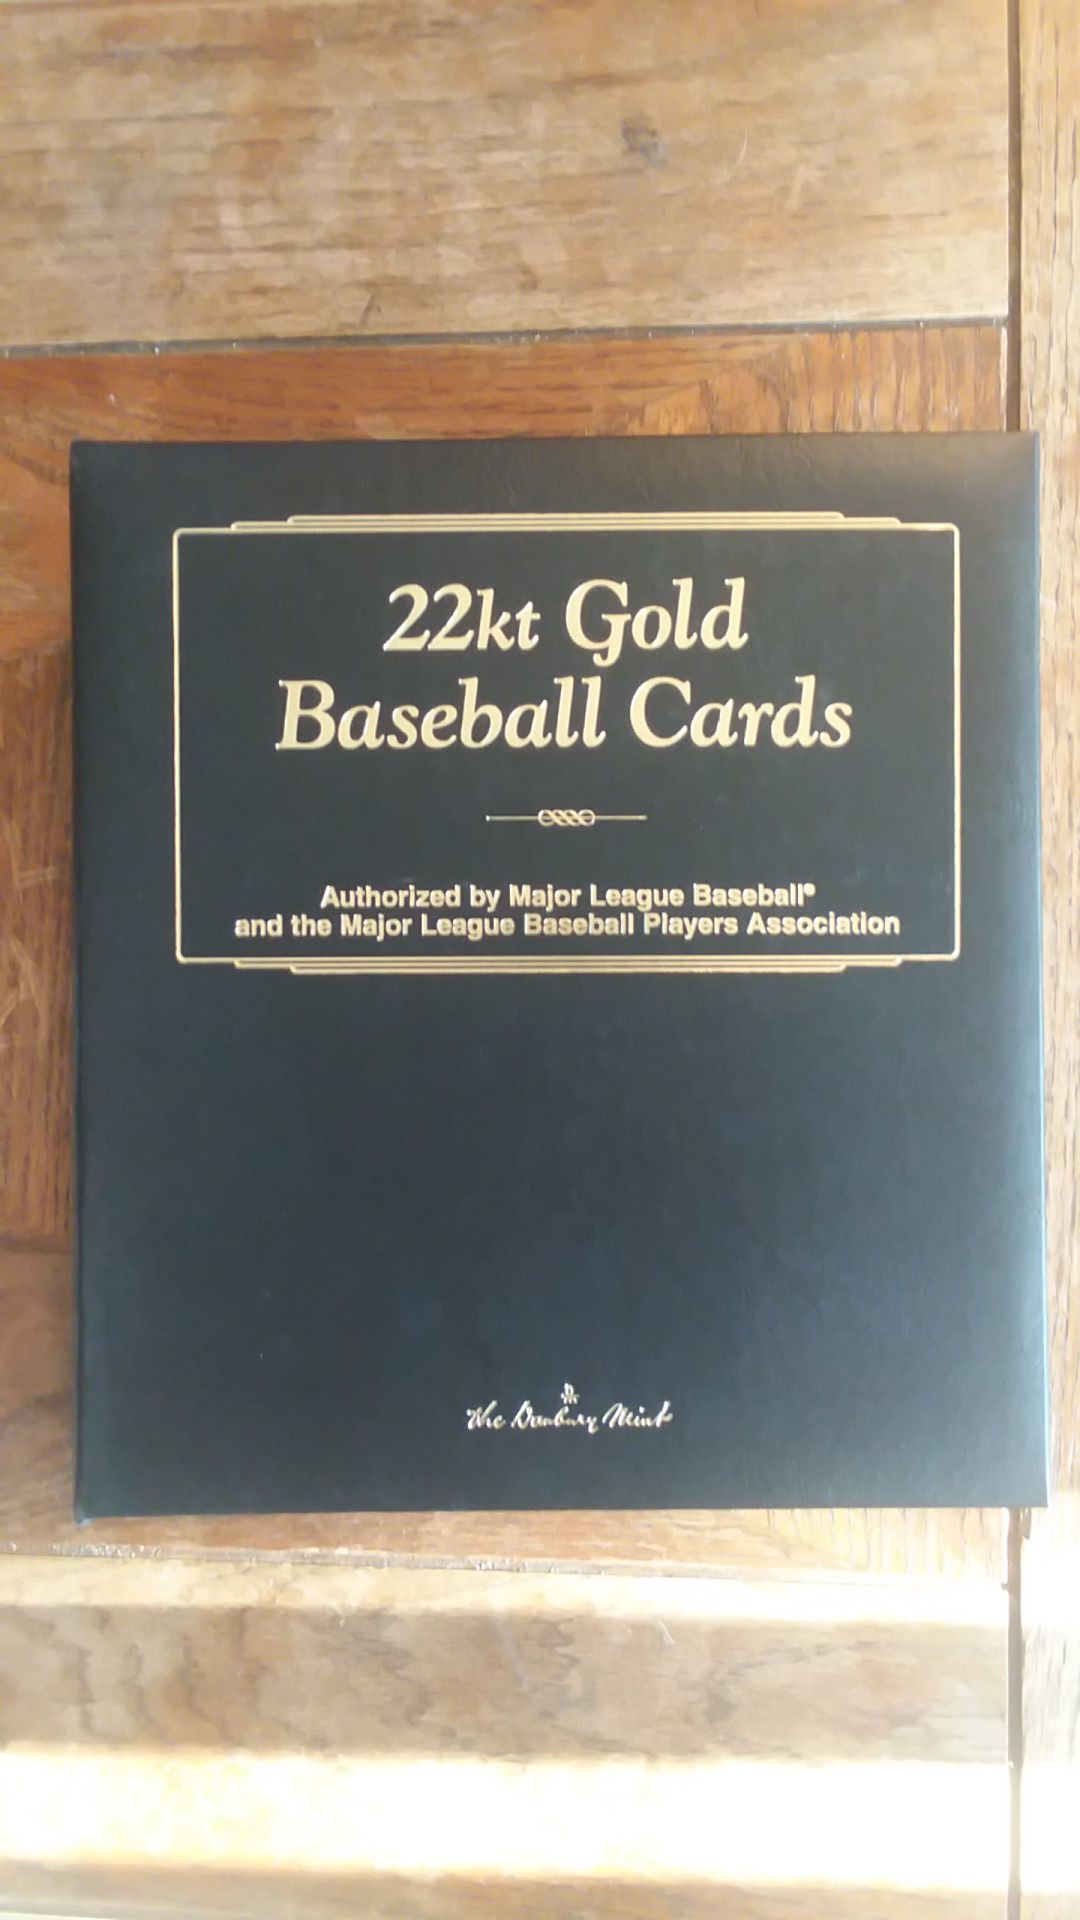 22kt GOLD BASEBALL CARD COLLECTION